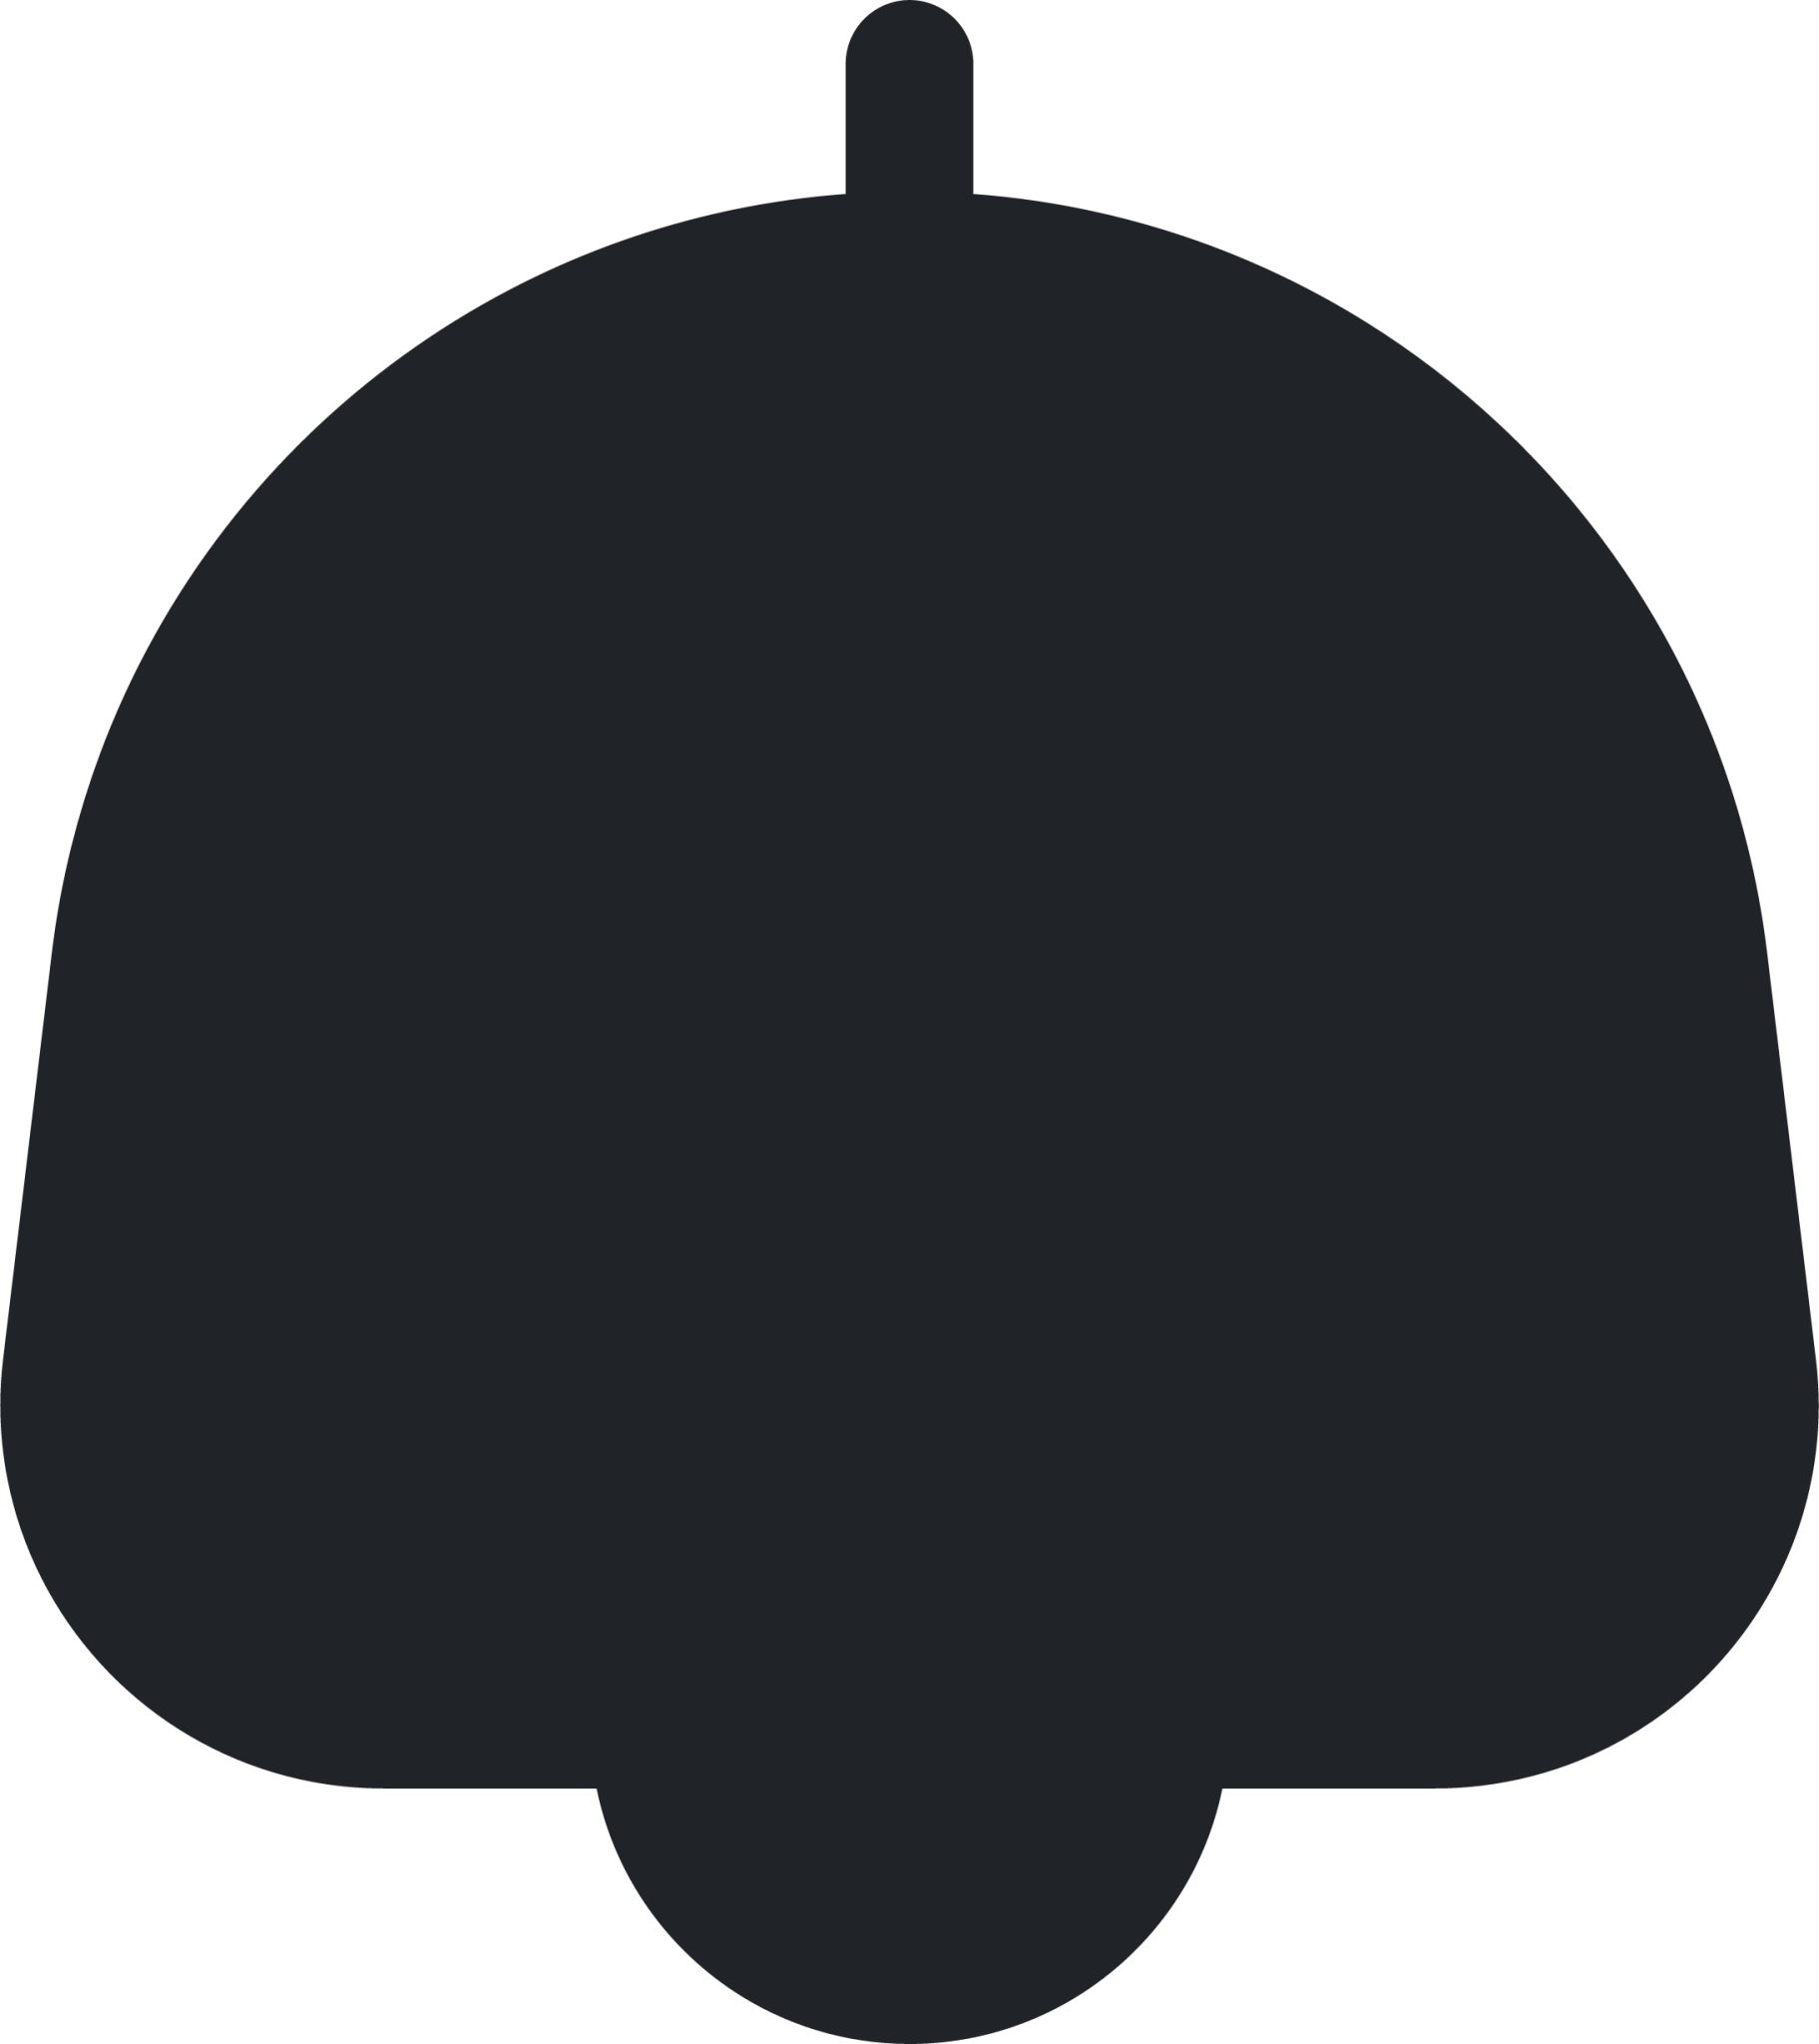 bell (rounded filled) icon